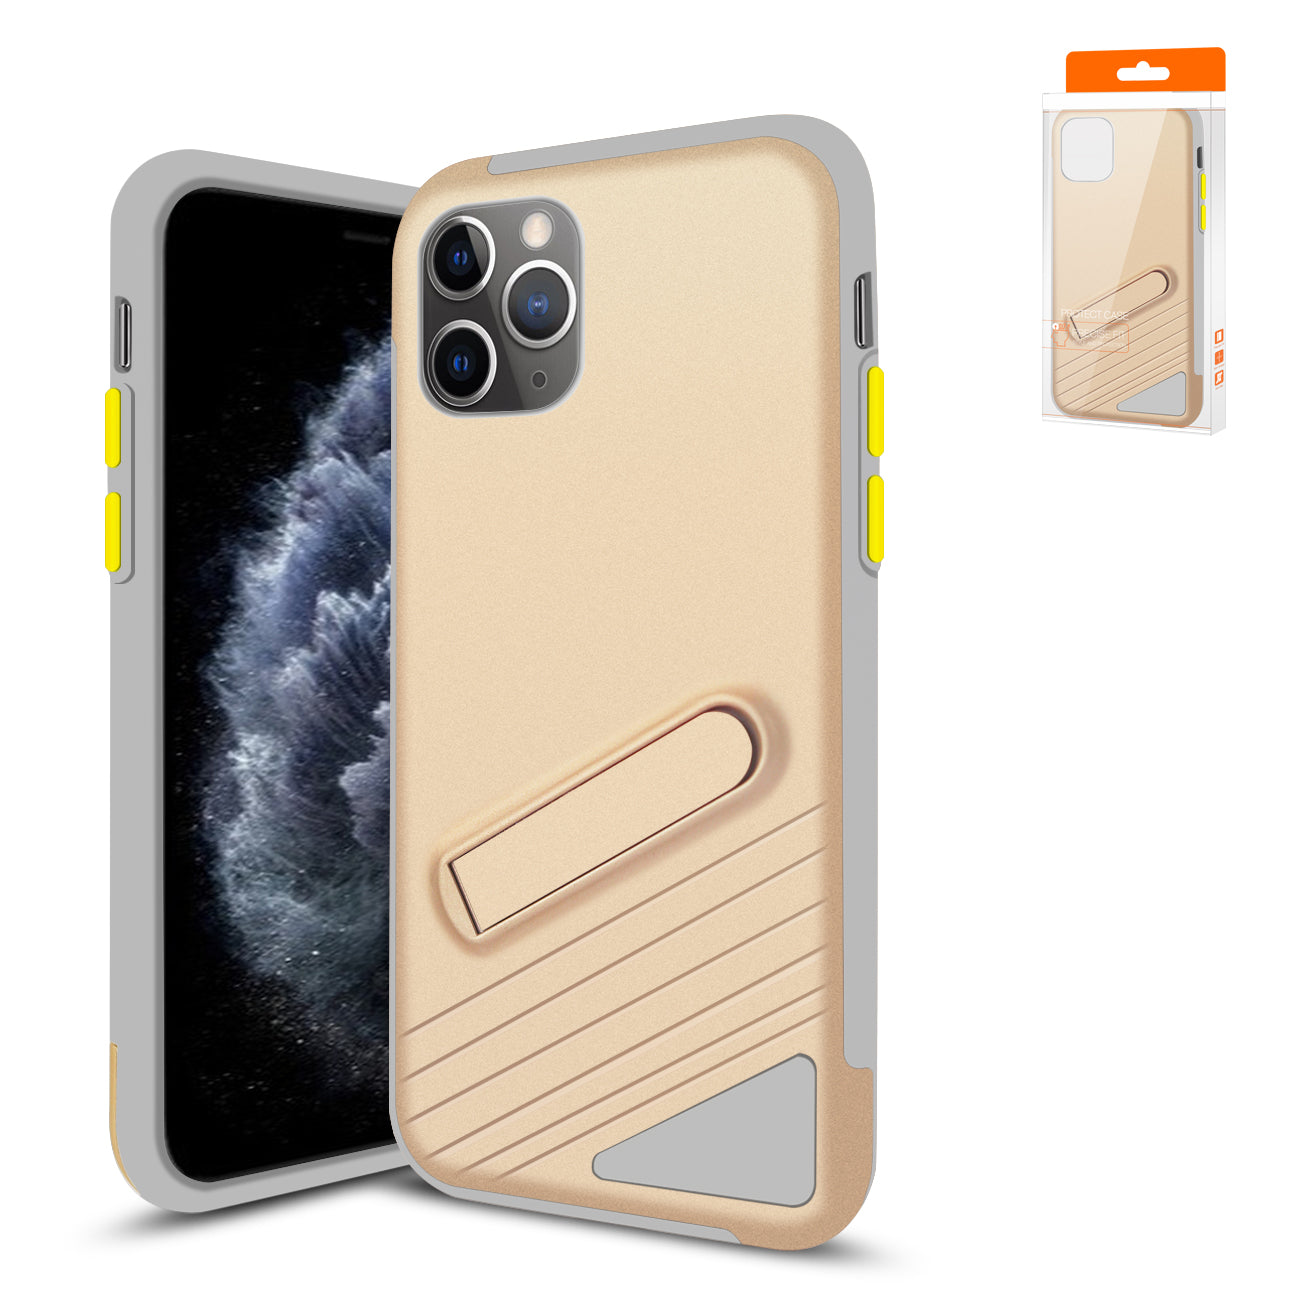 Cases Armor Apple iPhone 11 Pro Max Gold Color